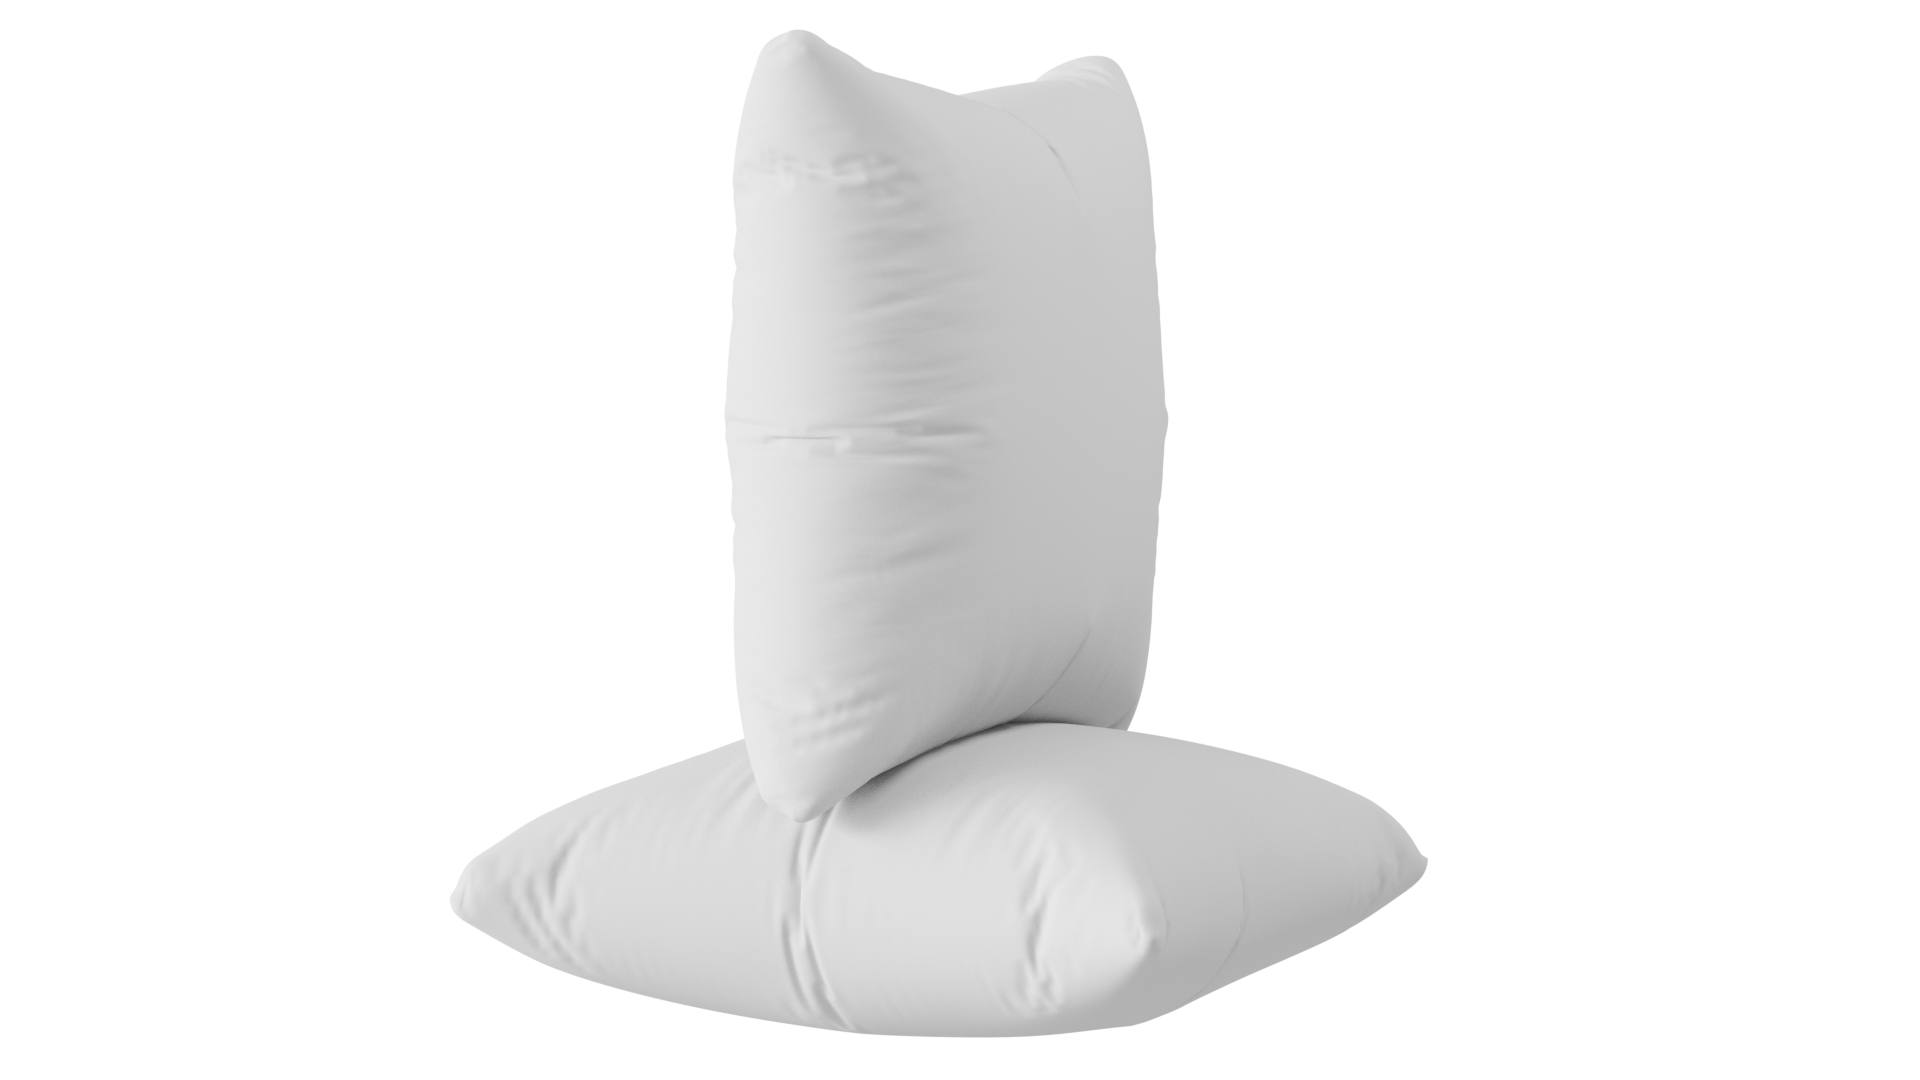 Utopia Bedding Throw Pillows Insert (Pack of 2 White) - 12 x 20 Inches Bed and Couch Pillows - Indoor Decorative Pillows